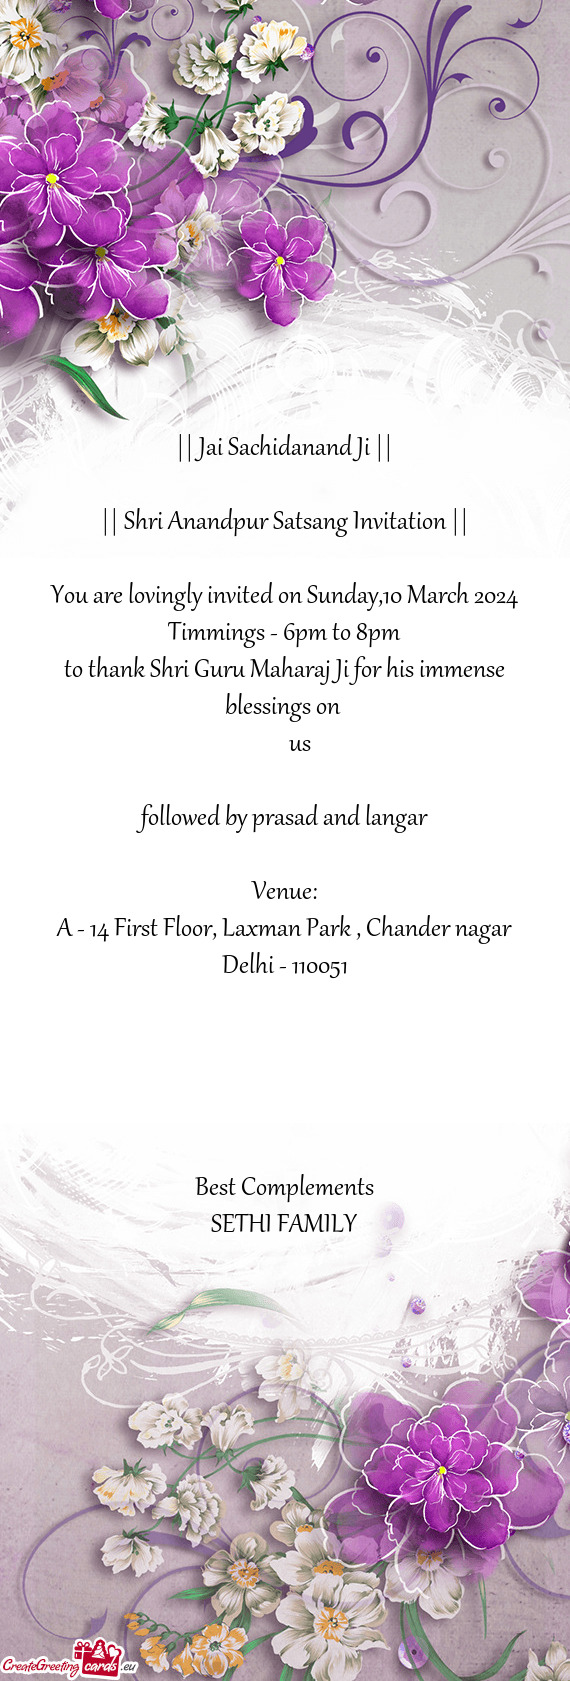 You are lovingly invited on Sunday,10 March 2024